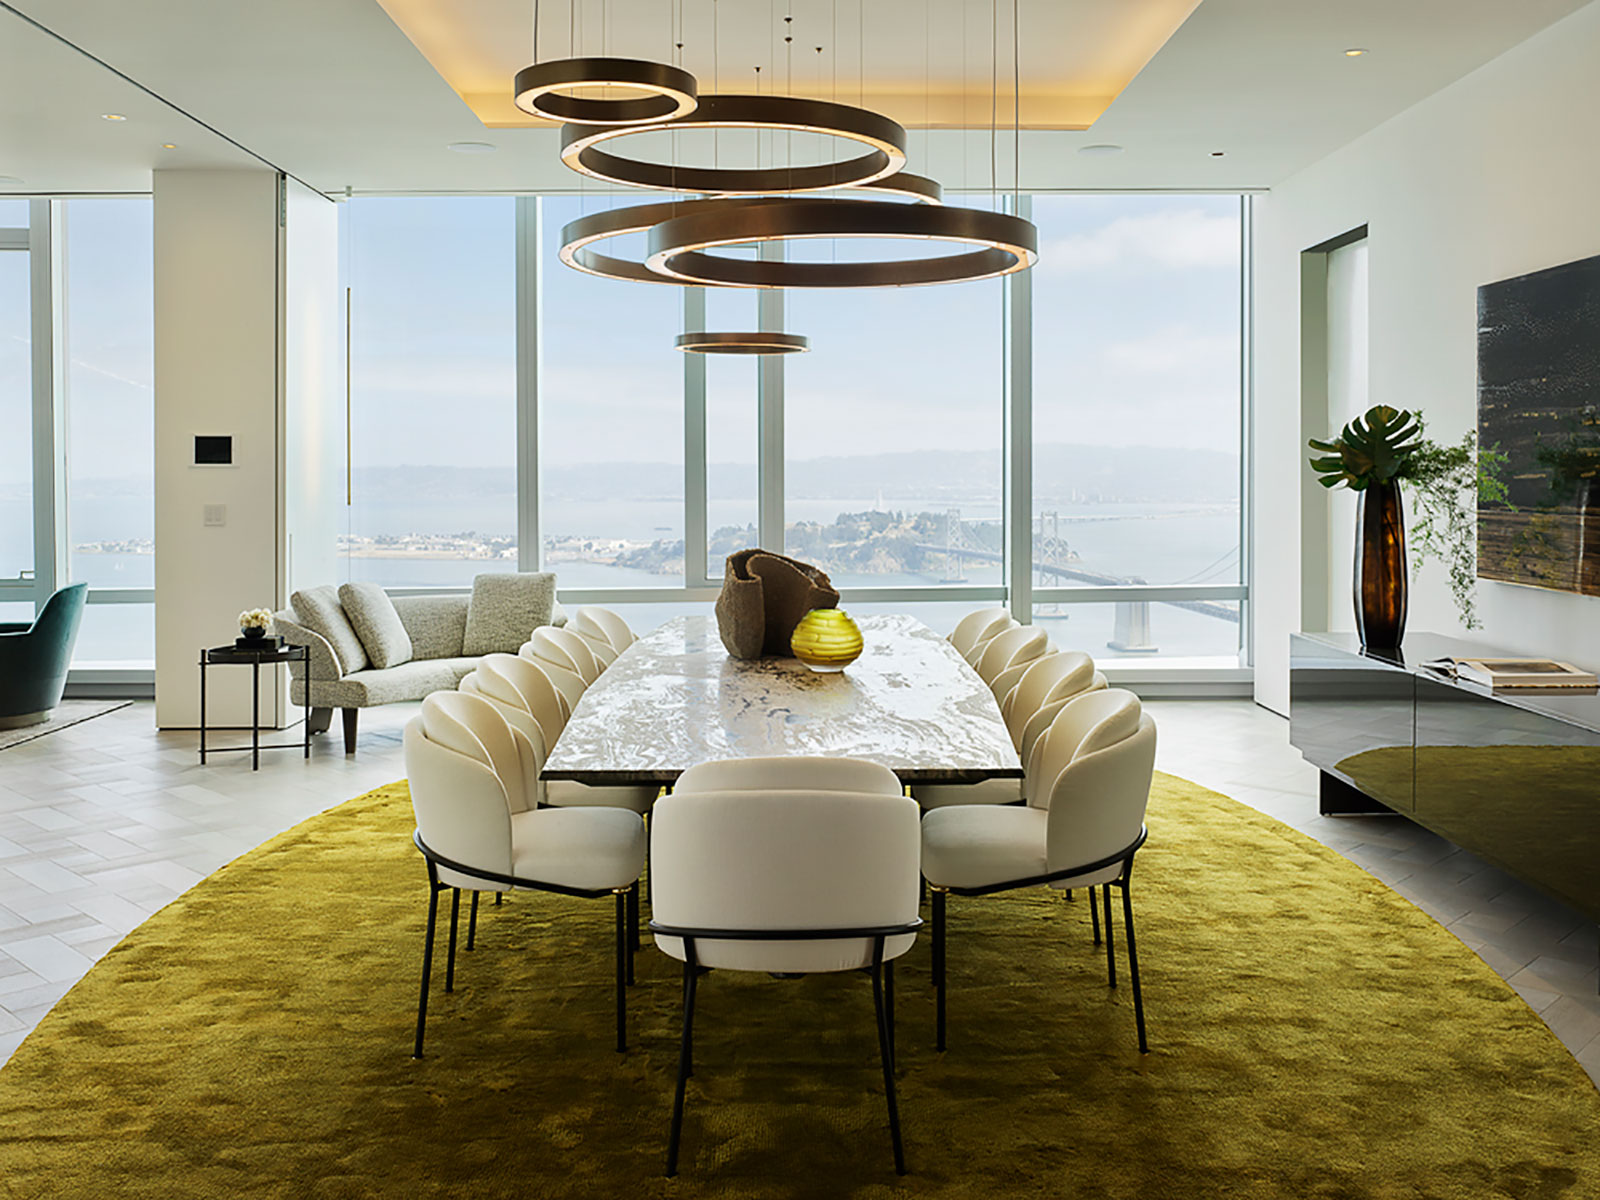 Grand Penthouse dining room